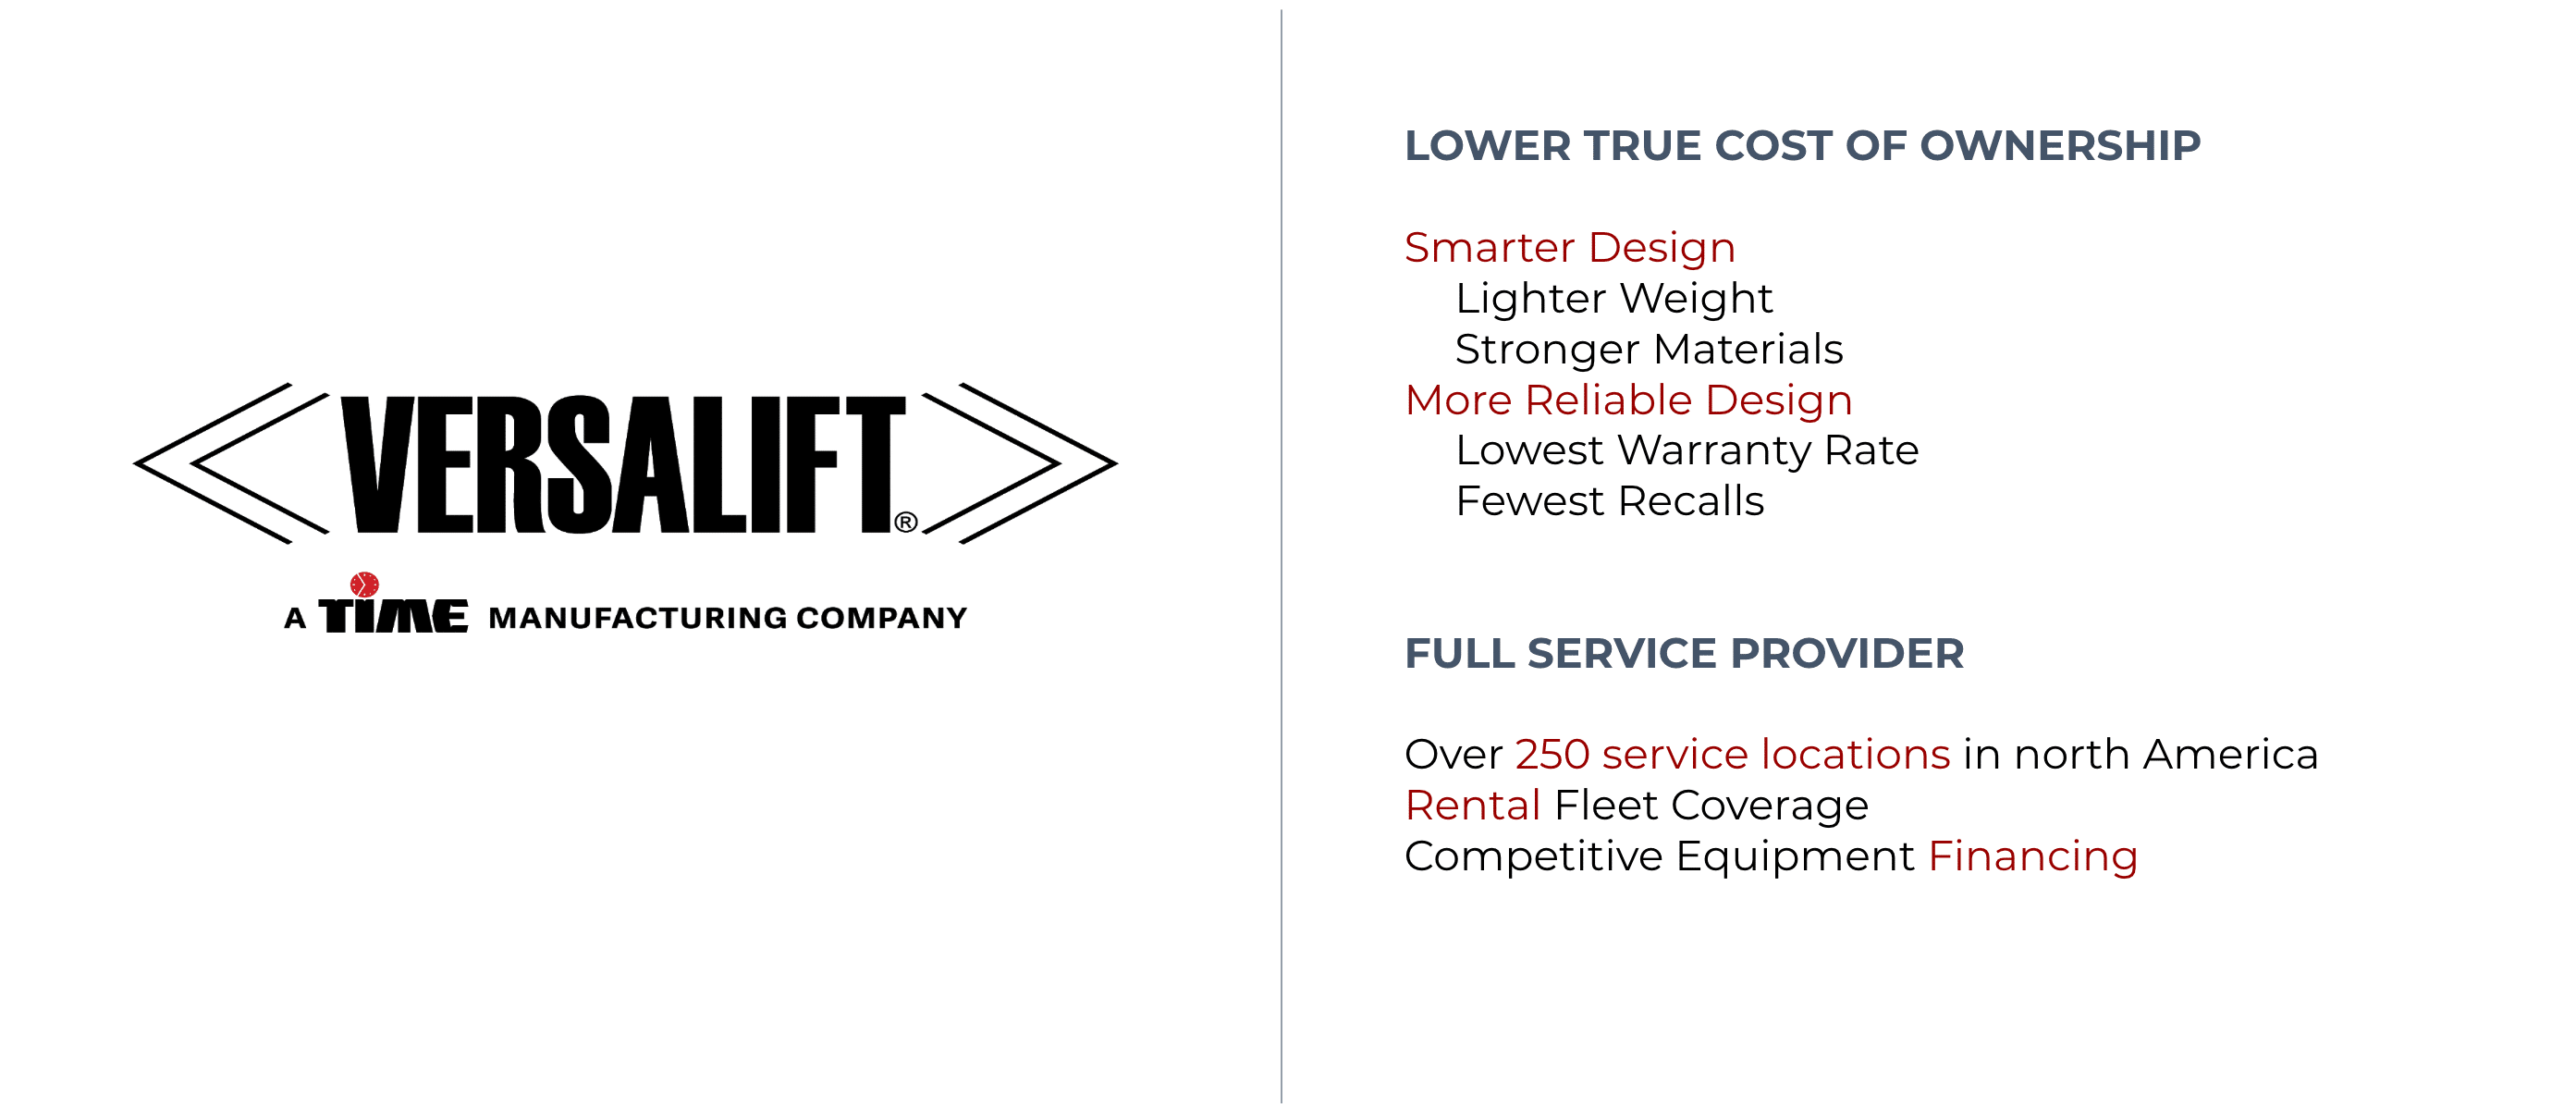 Aerial Lifts with a Lower True Cost of Ownership